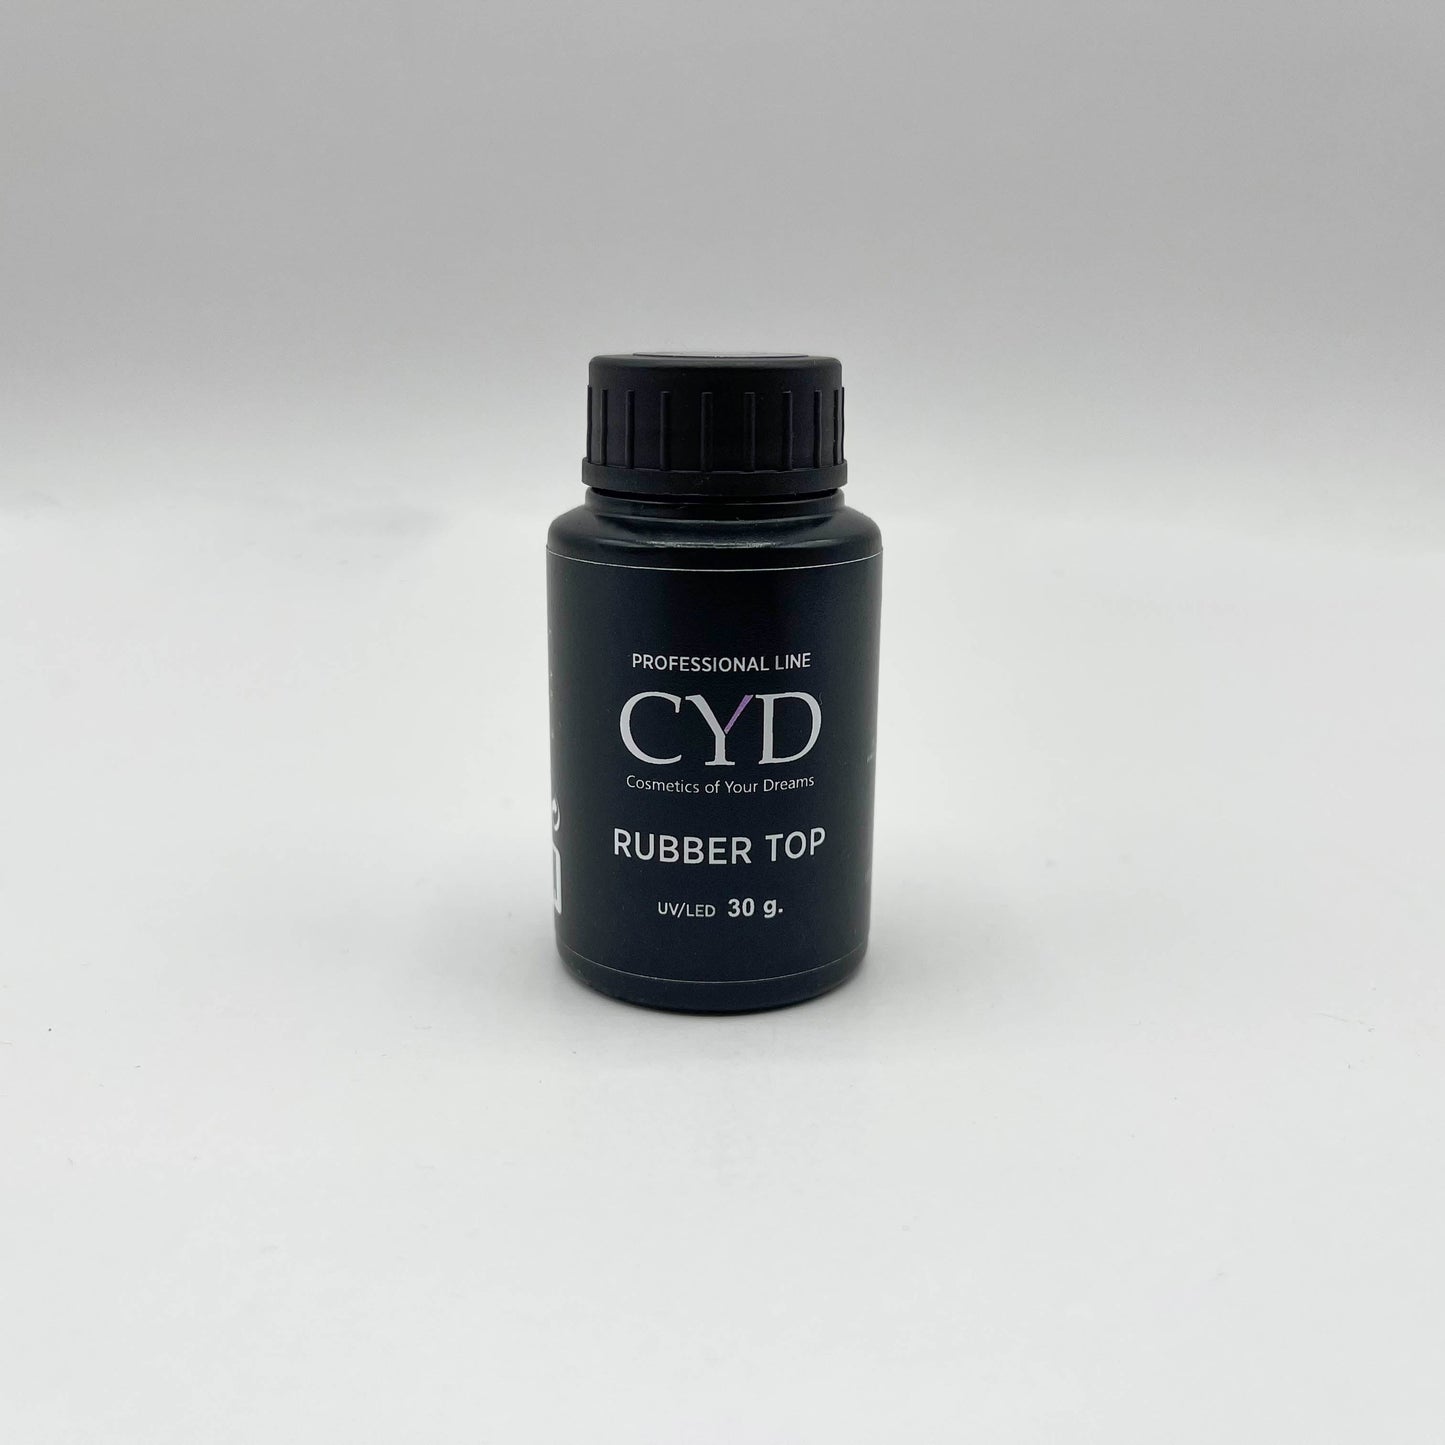 CYD Rubber Top (Wipe)